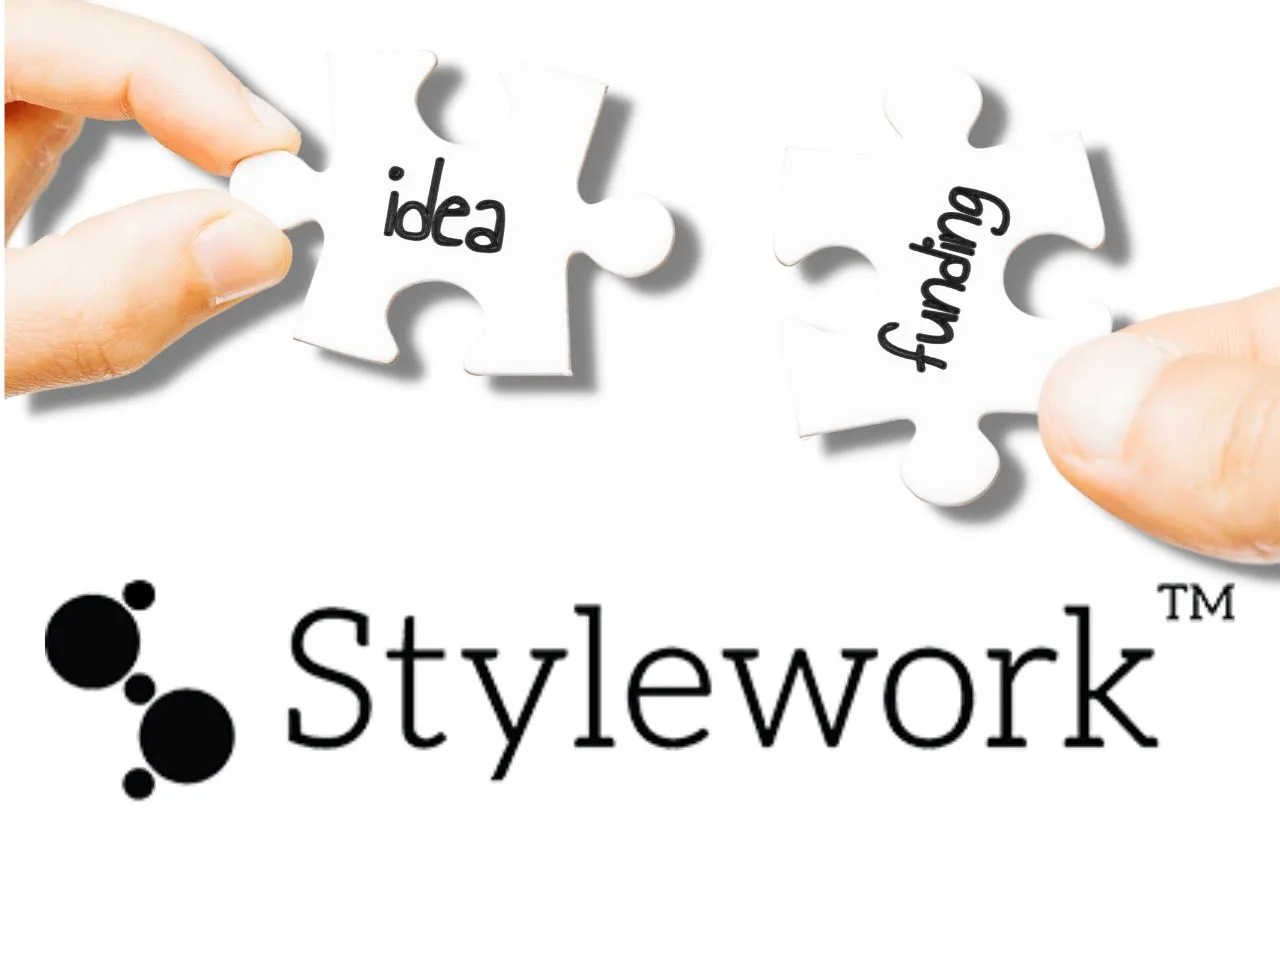 Coworking Marketplace Stylework Secures $2 Mn In Series A1 Round